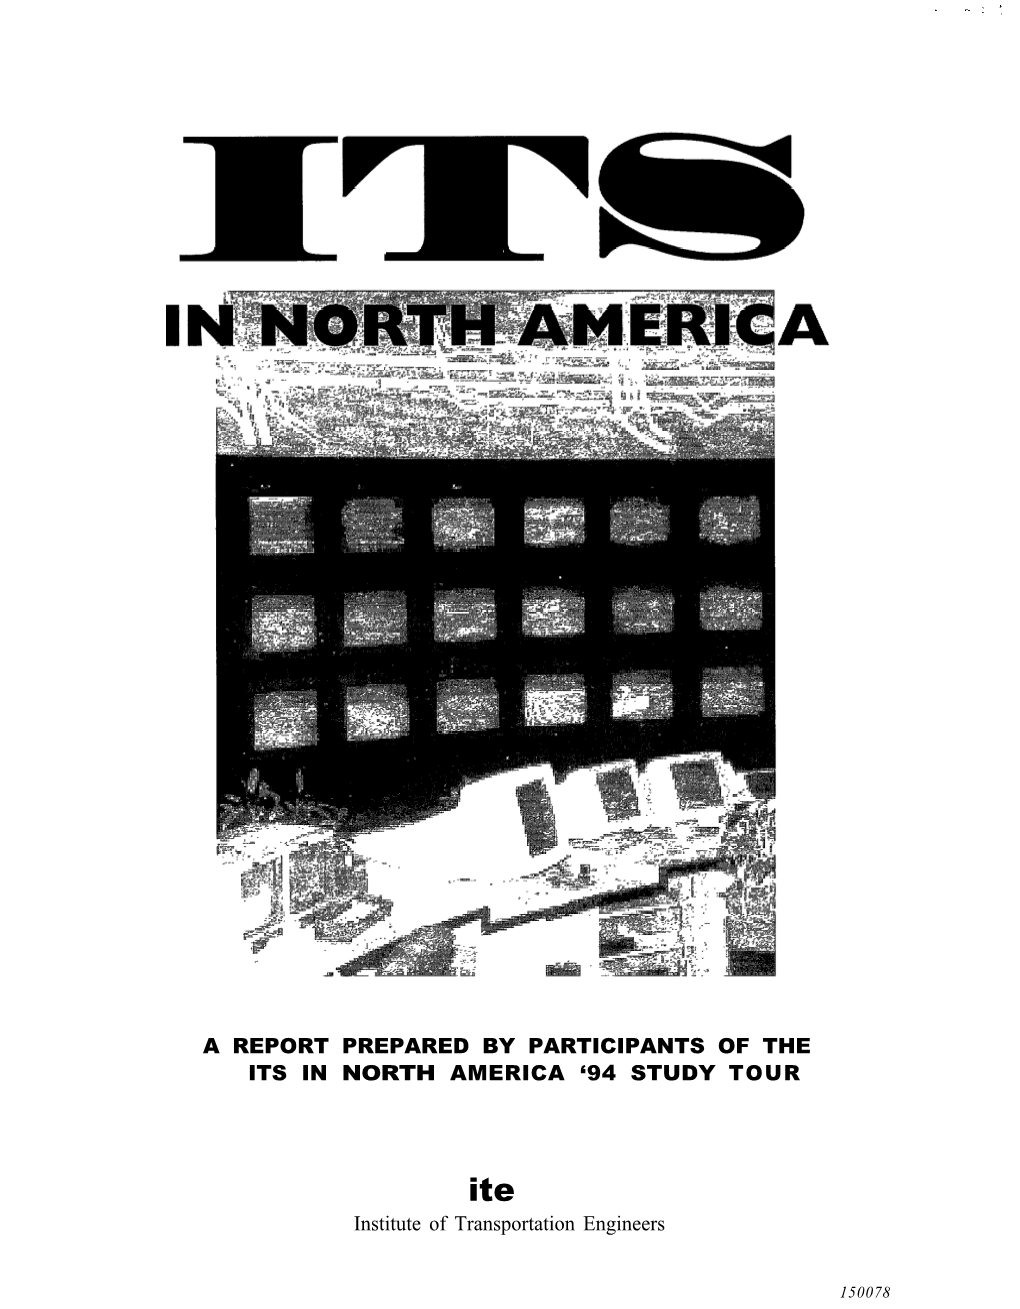 Its in North America ‘94 Study Tour